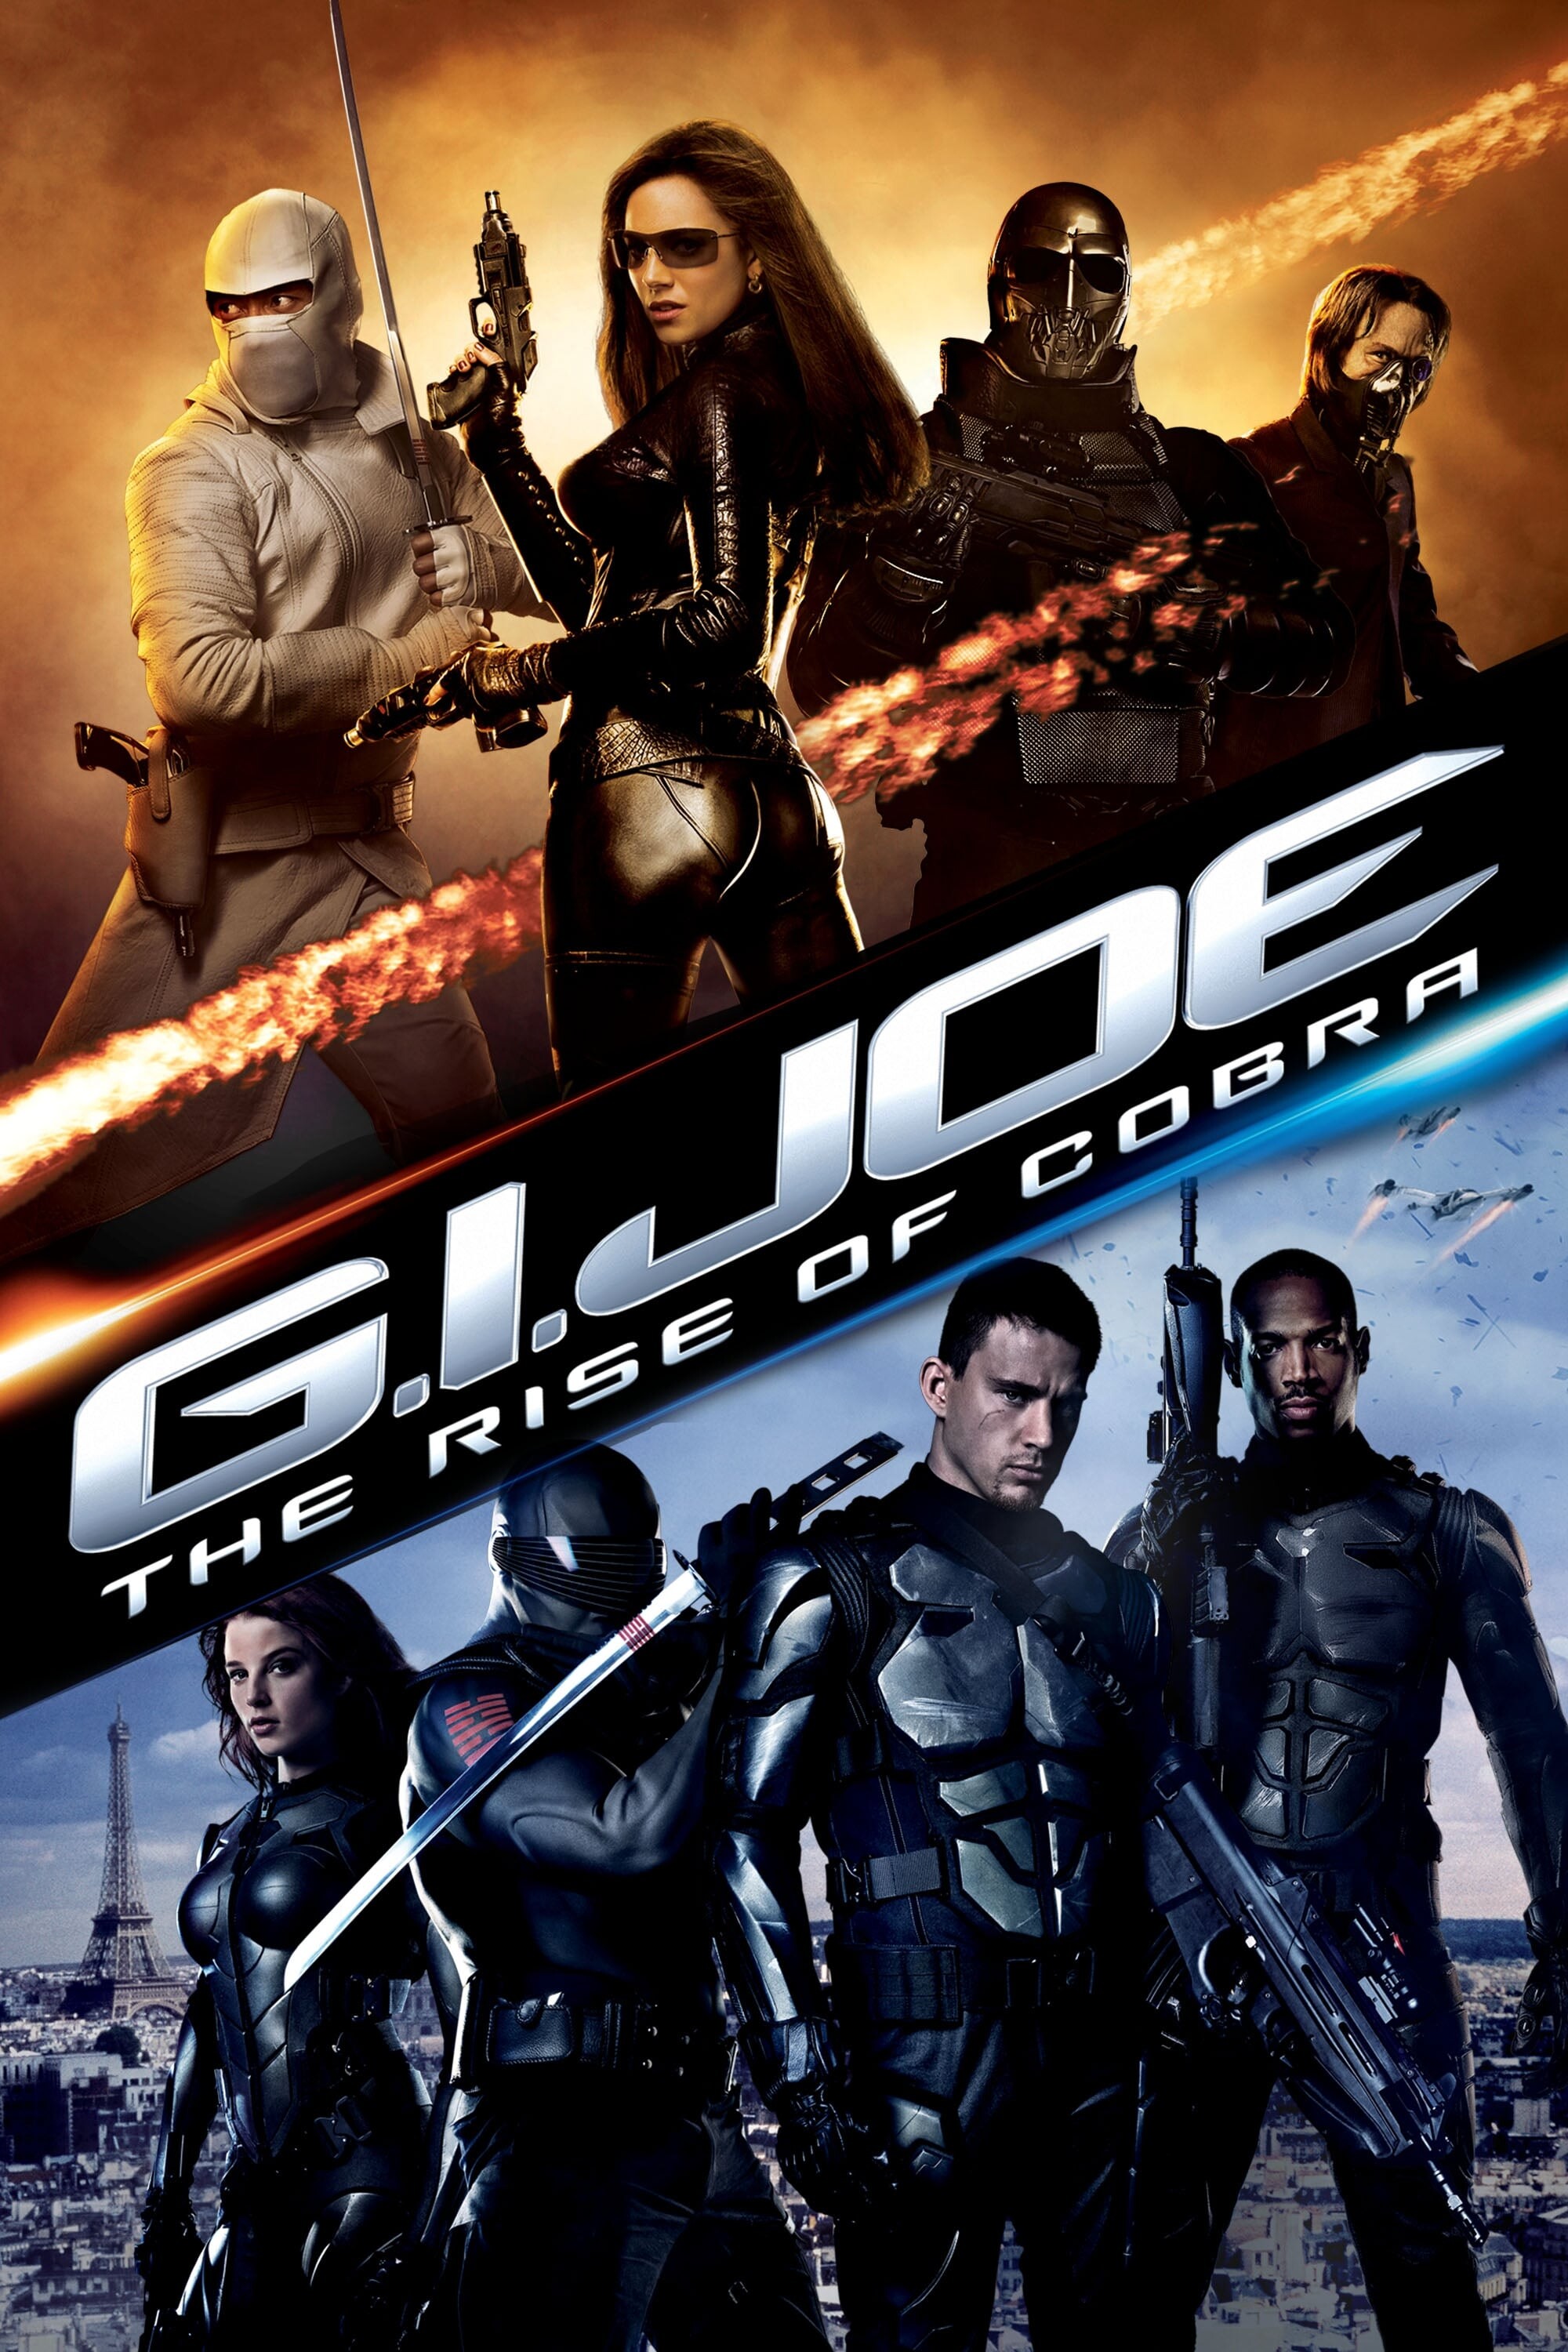 G.I. Joe (Movie): Theatrical Release Poster, American Military, Science Fiction, Action Film, Toy Franchise Created By Hasbro, 2009. 2000x3000 HD Background.